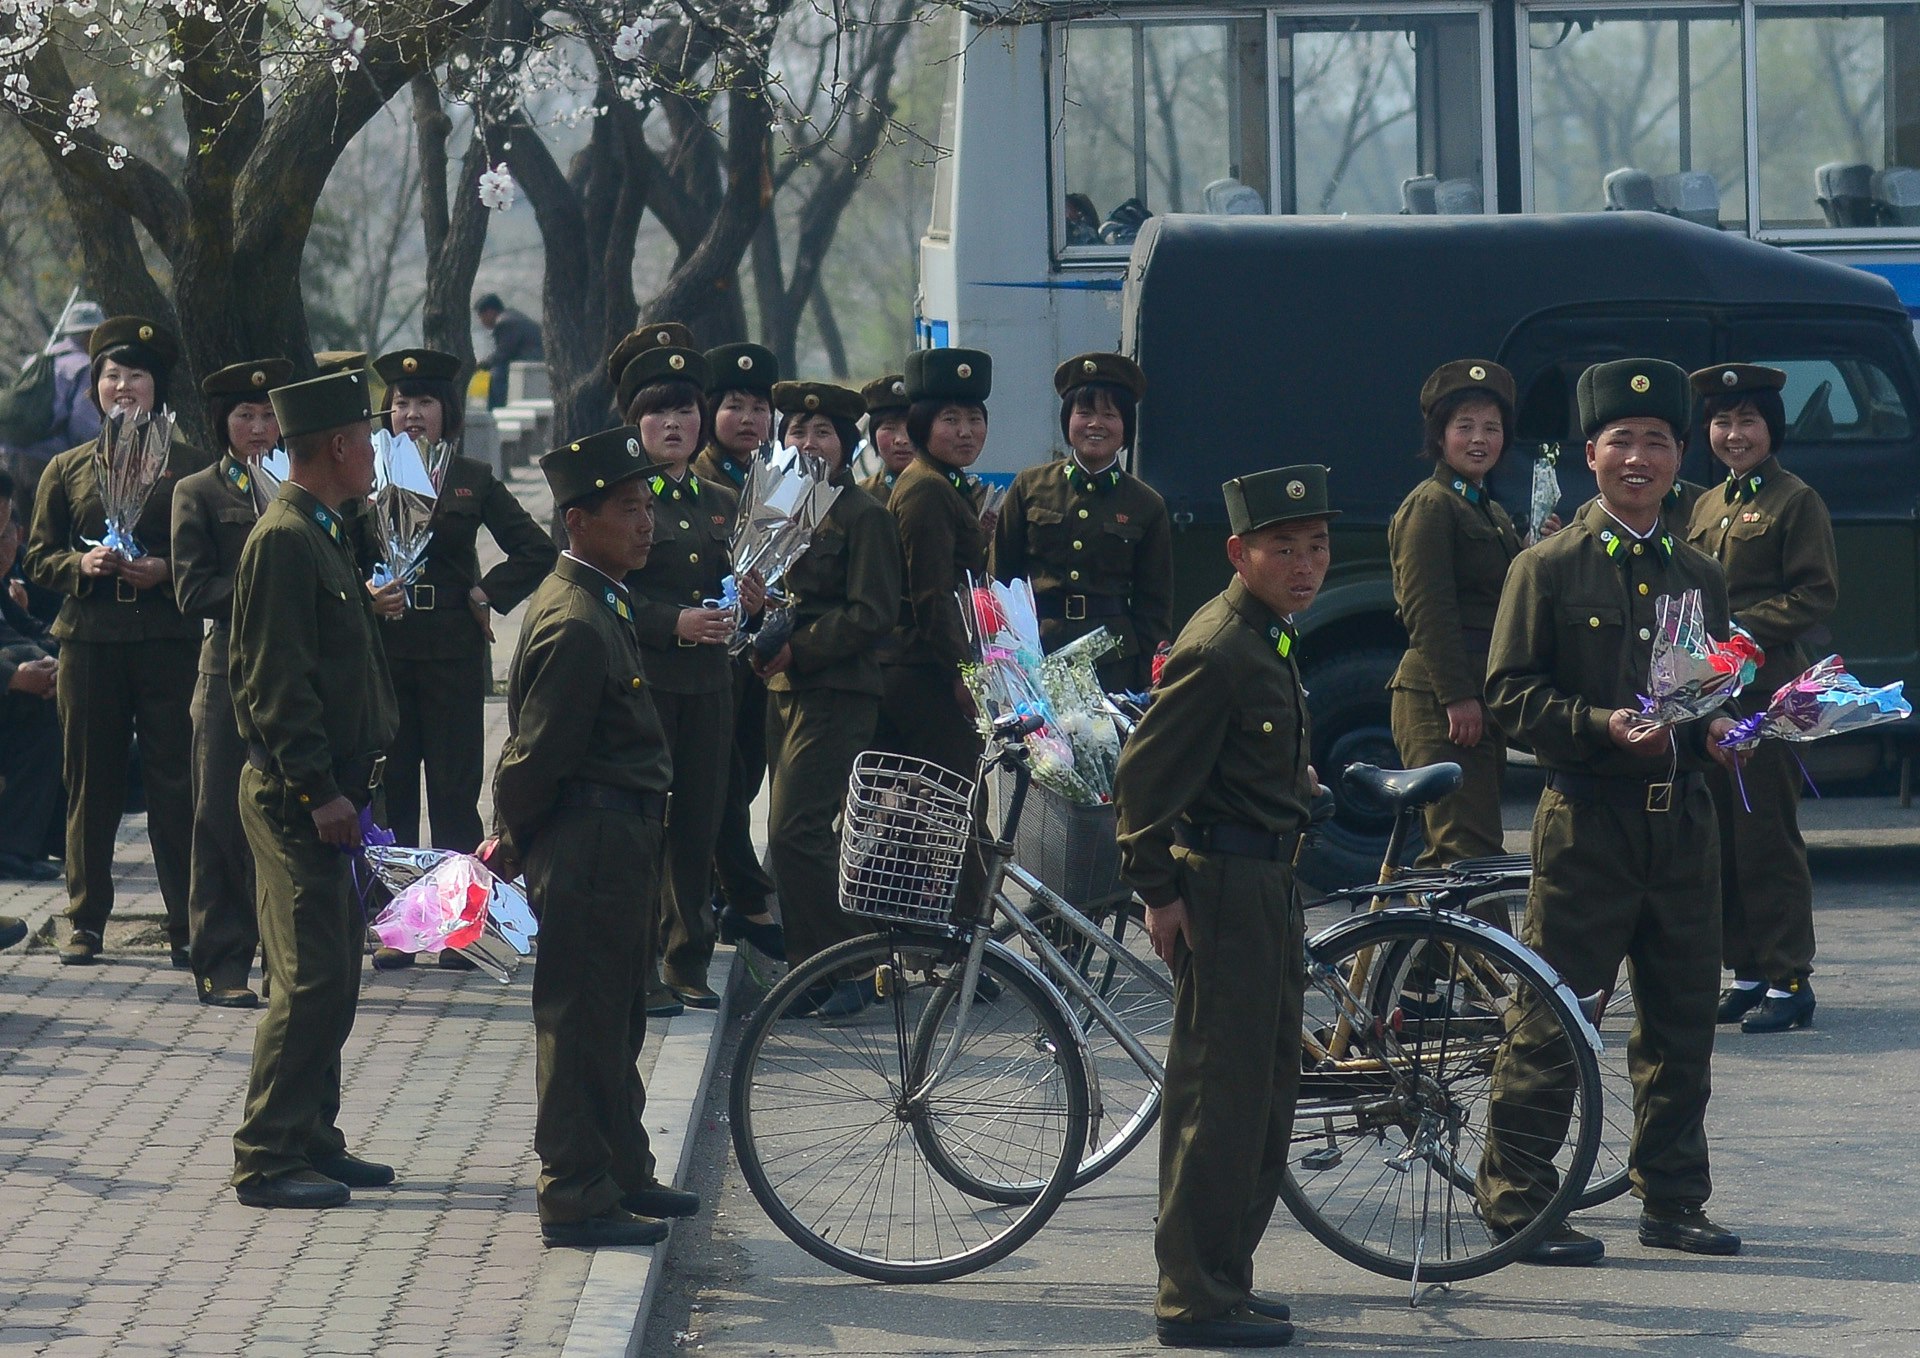 North Korean soldiers react to the camera just outside of Pyongyang. Soldiers generally were quite curious and friendly when noticing foreigners. 